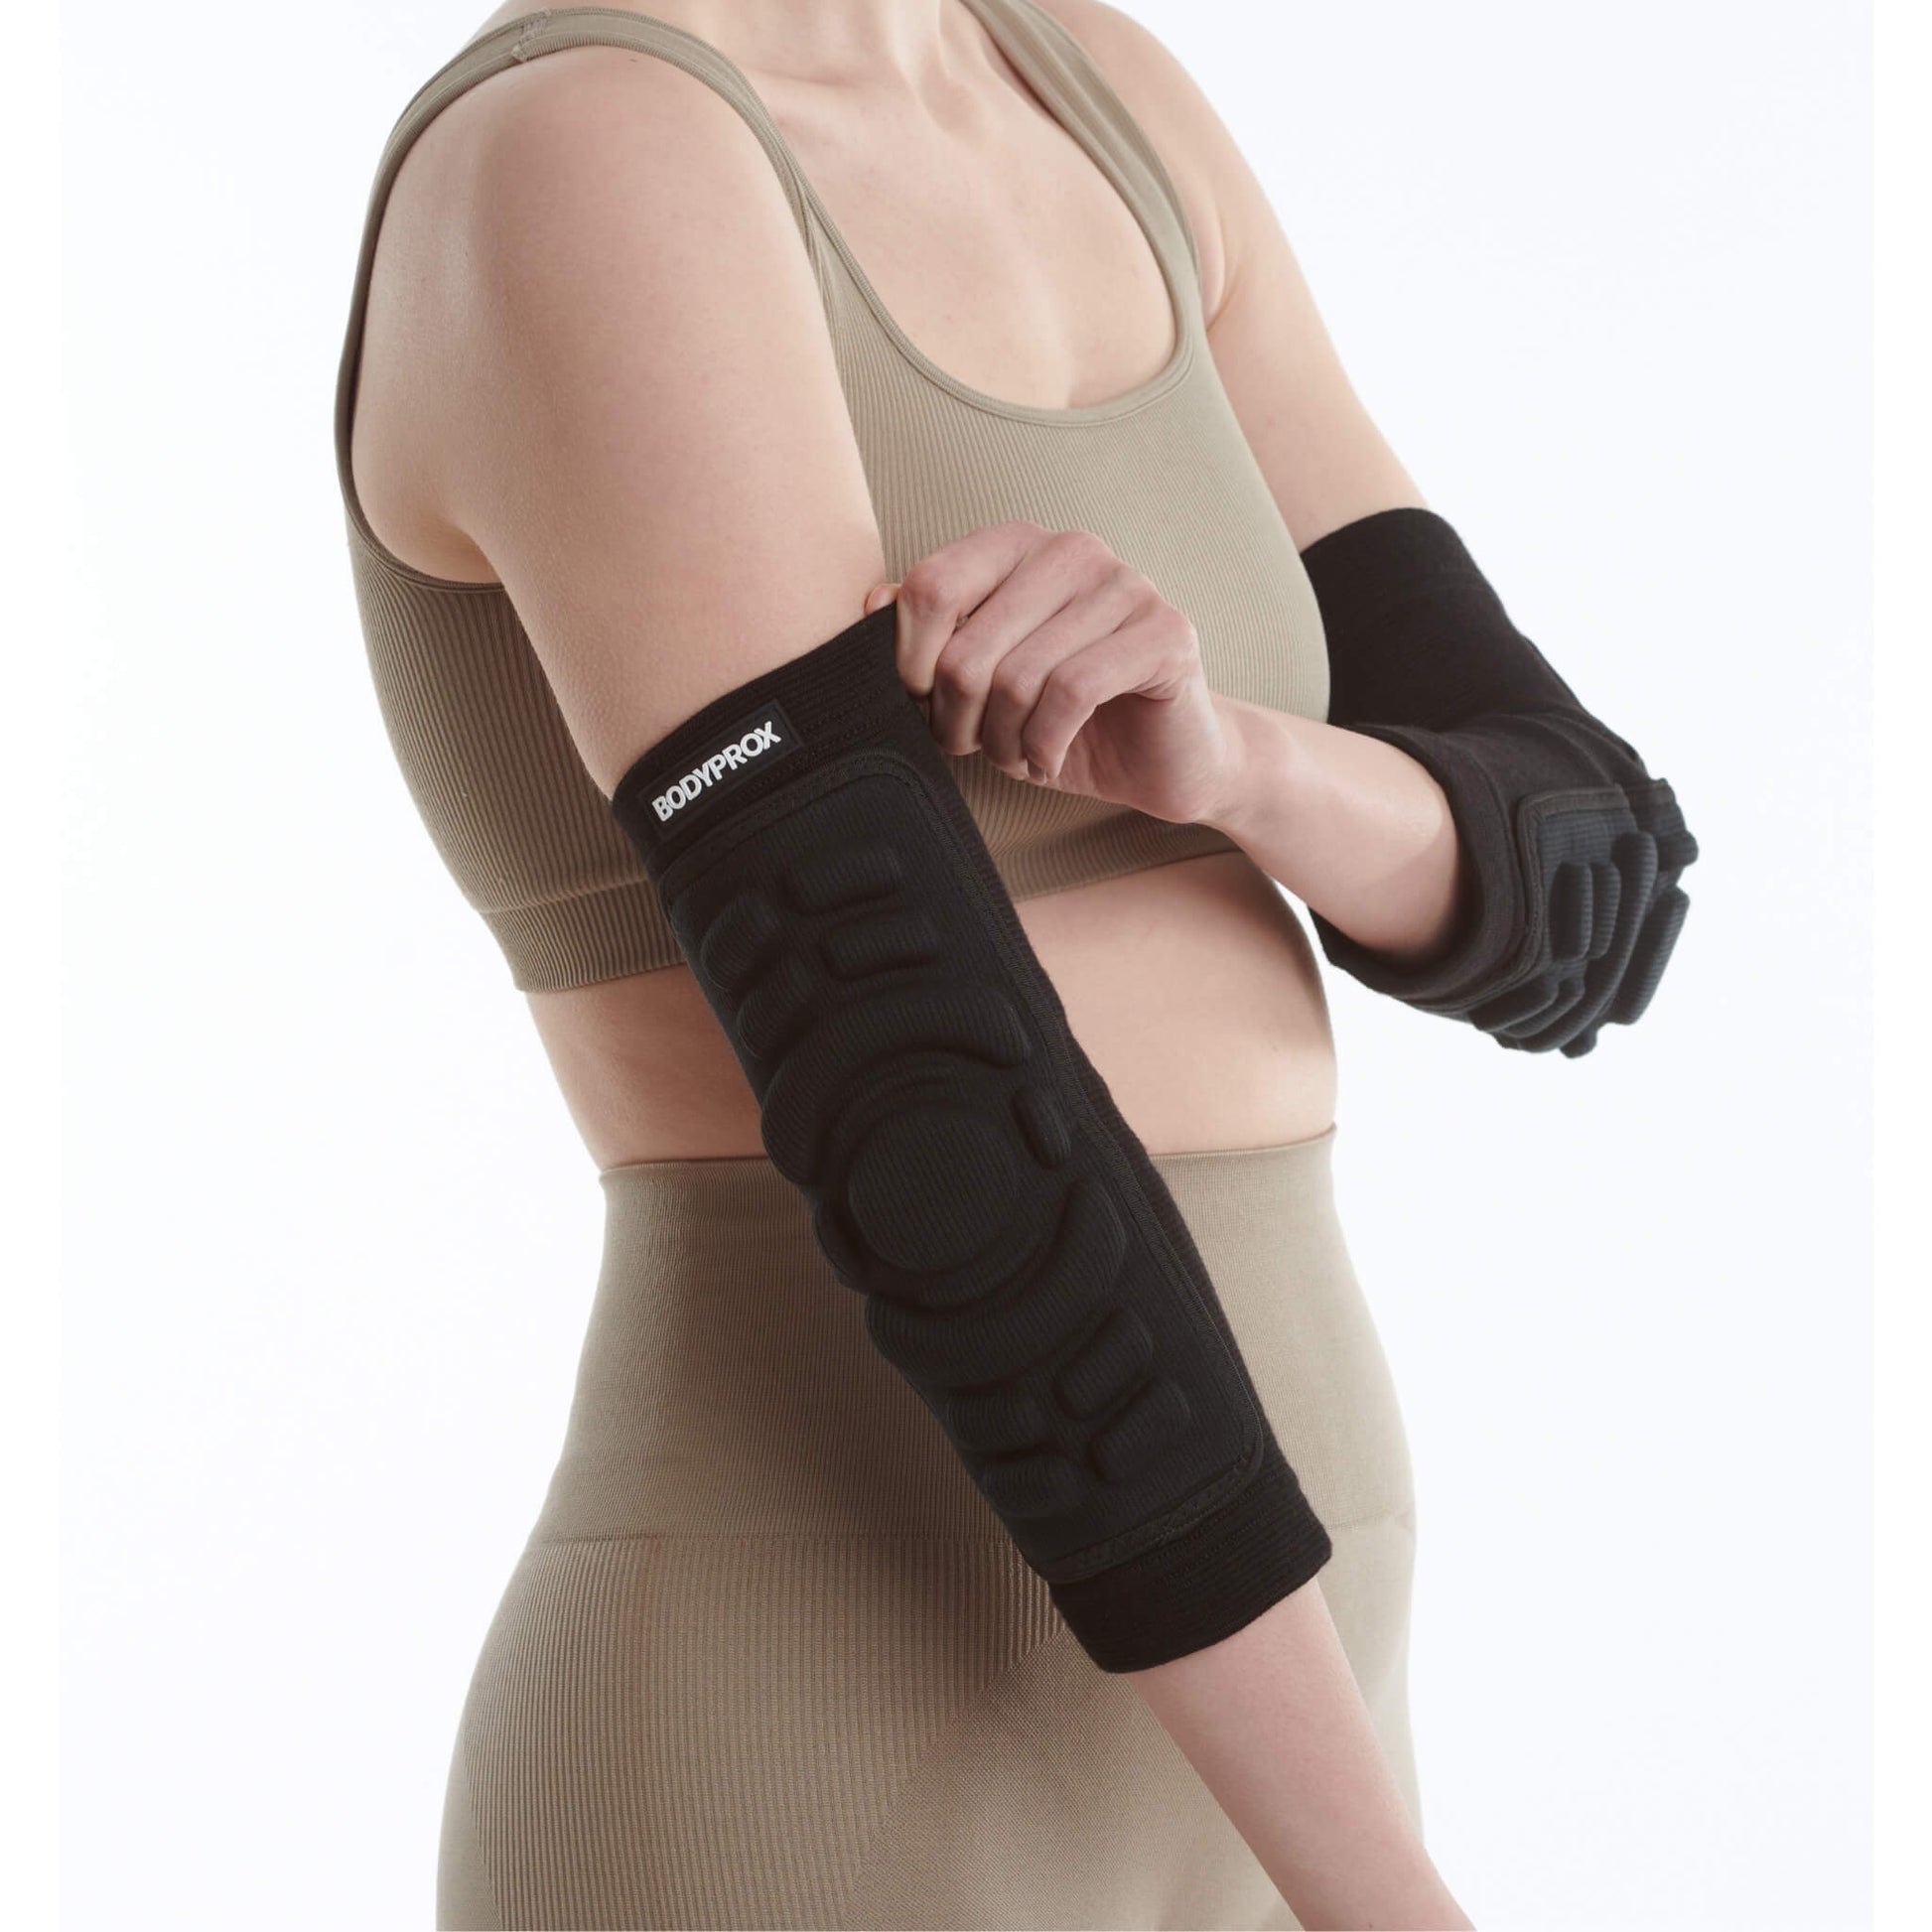 Tennis Elbow Support with Gel Pad, Elbow Braces & Supports, By Body Part, Open Catalog